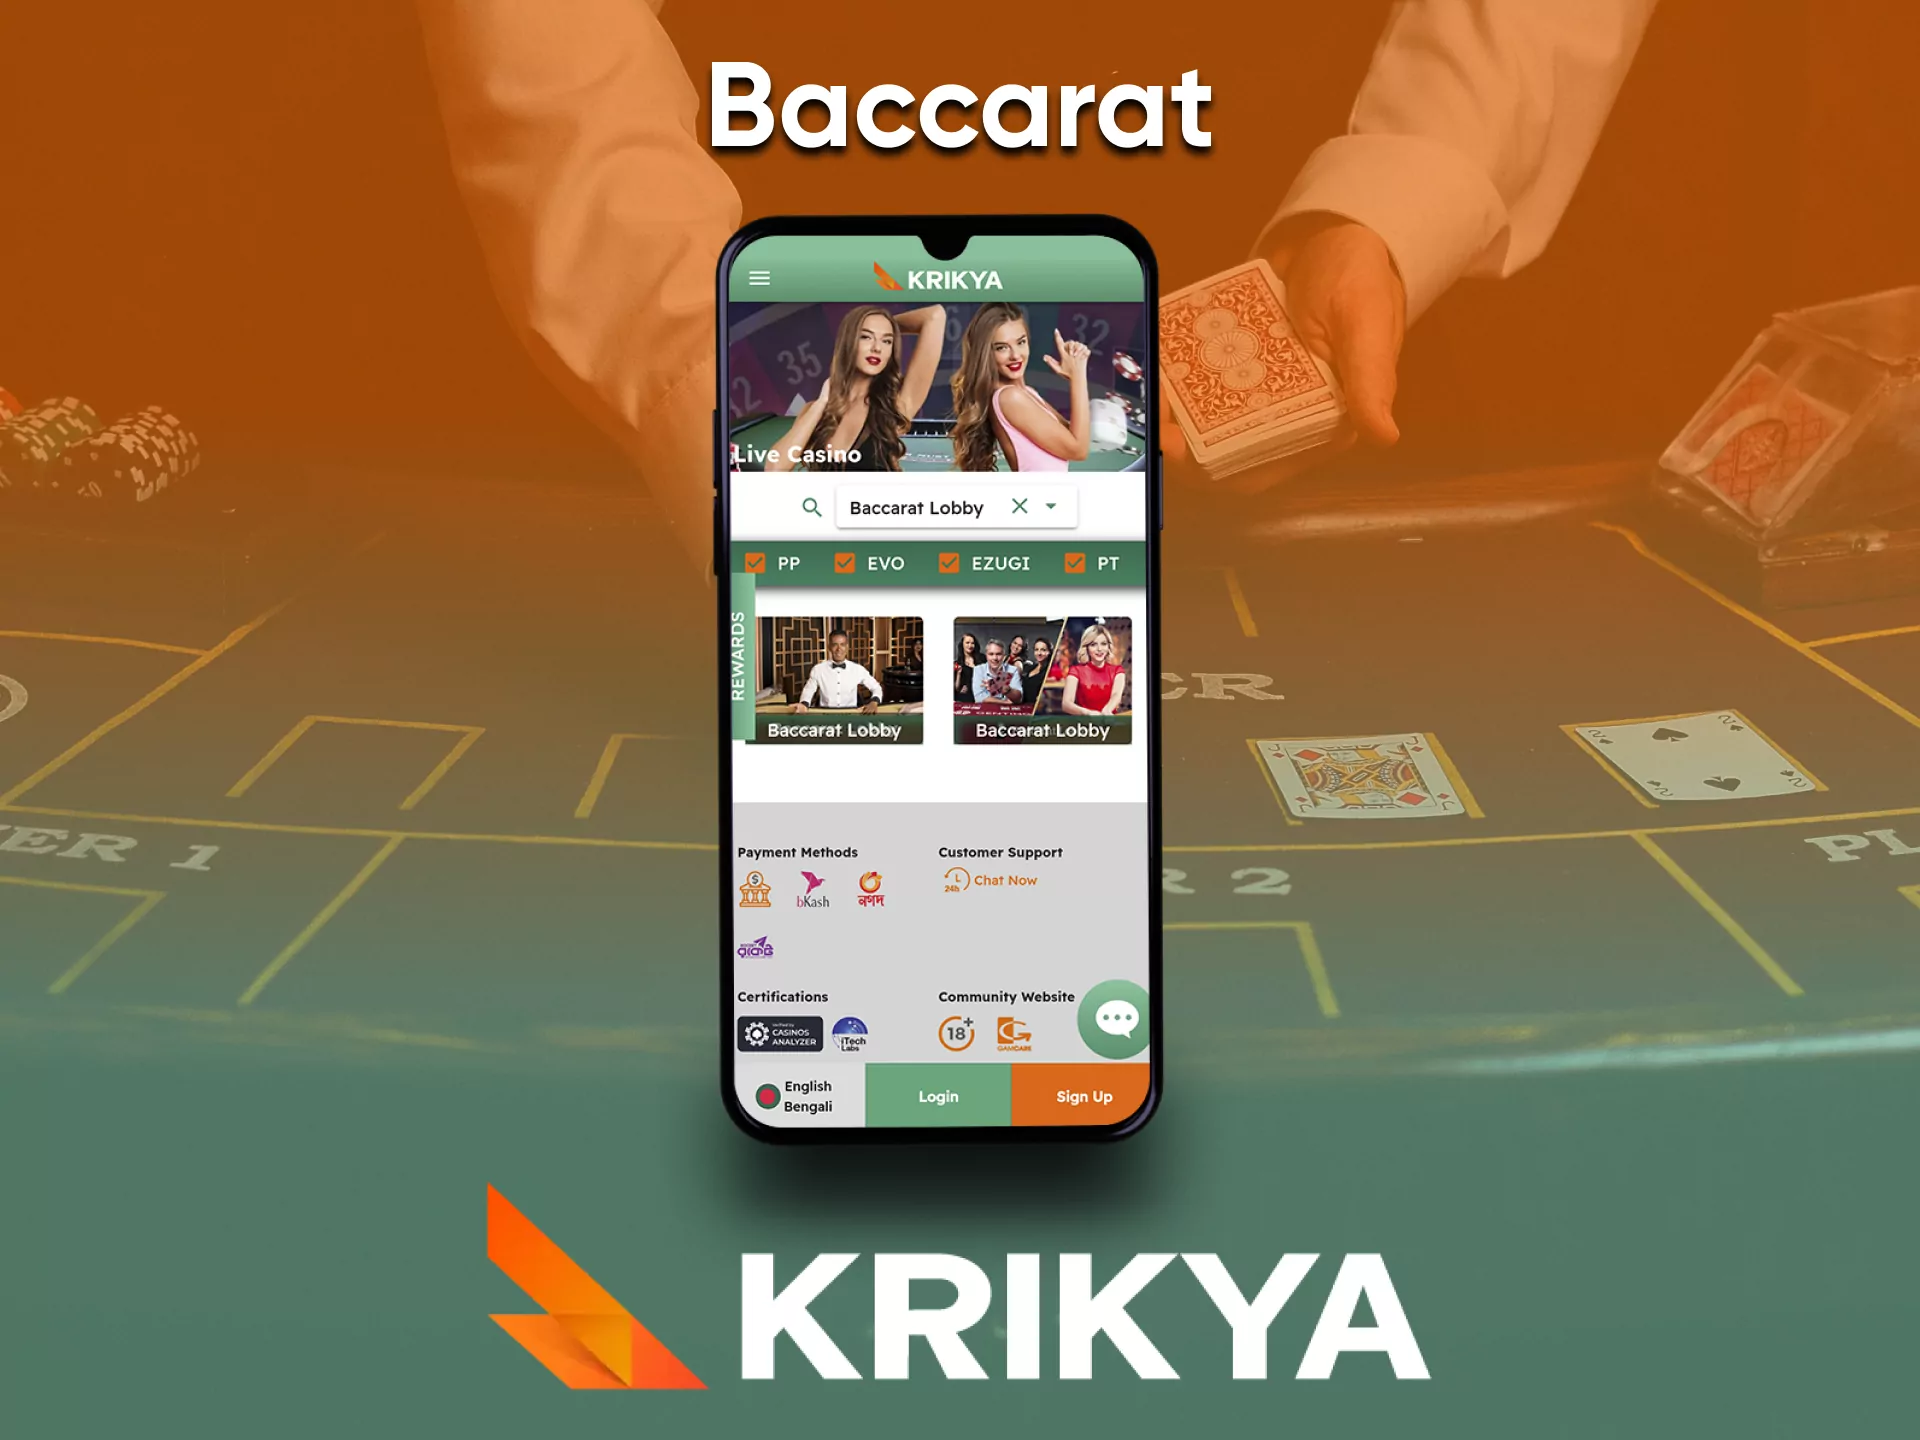 Baccarat is a game that you can play through the Krikya app.